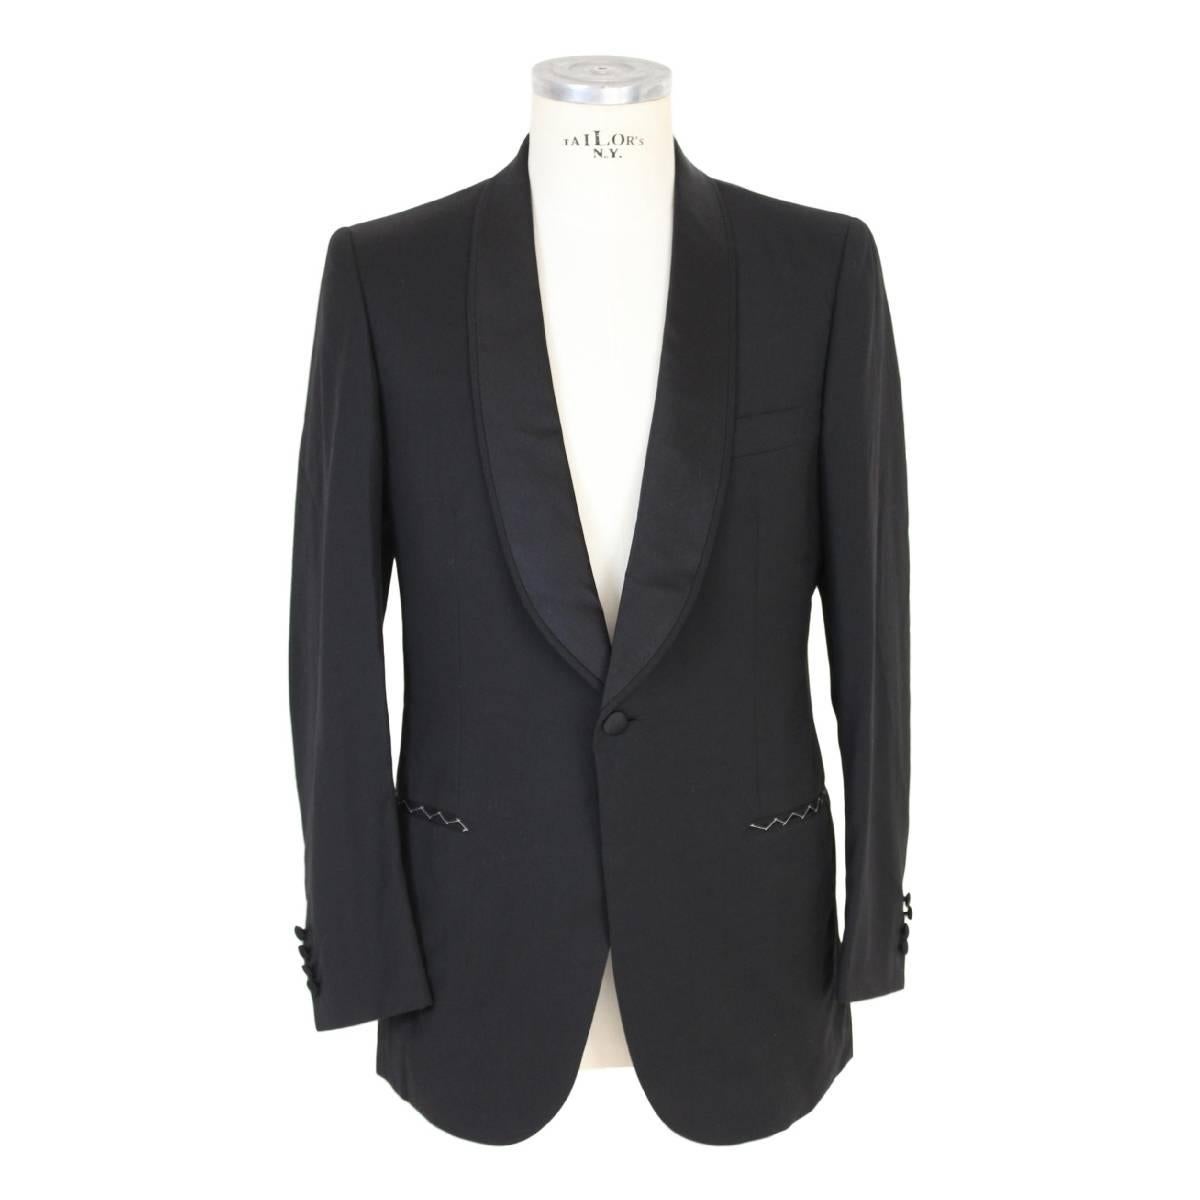 Brioni Roman Style vintage smoking jacket and trousers, in pure wool. Black colour. Size 48 Italian. One button jacket with reverse satin, one button closure in satin, on the sleeve 4 small buttons. The pockets of the jacket are still sewn. Trousers